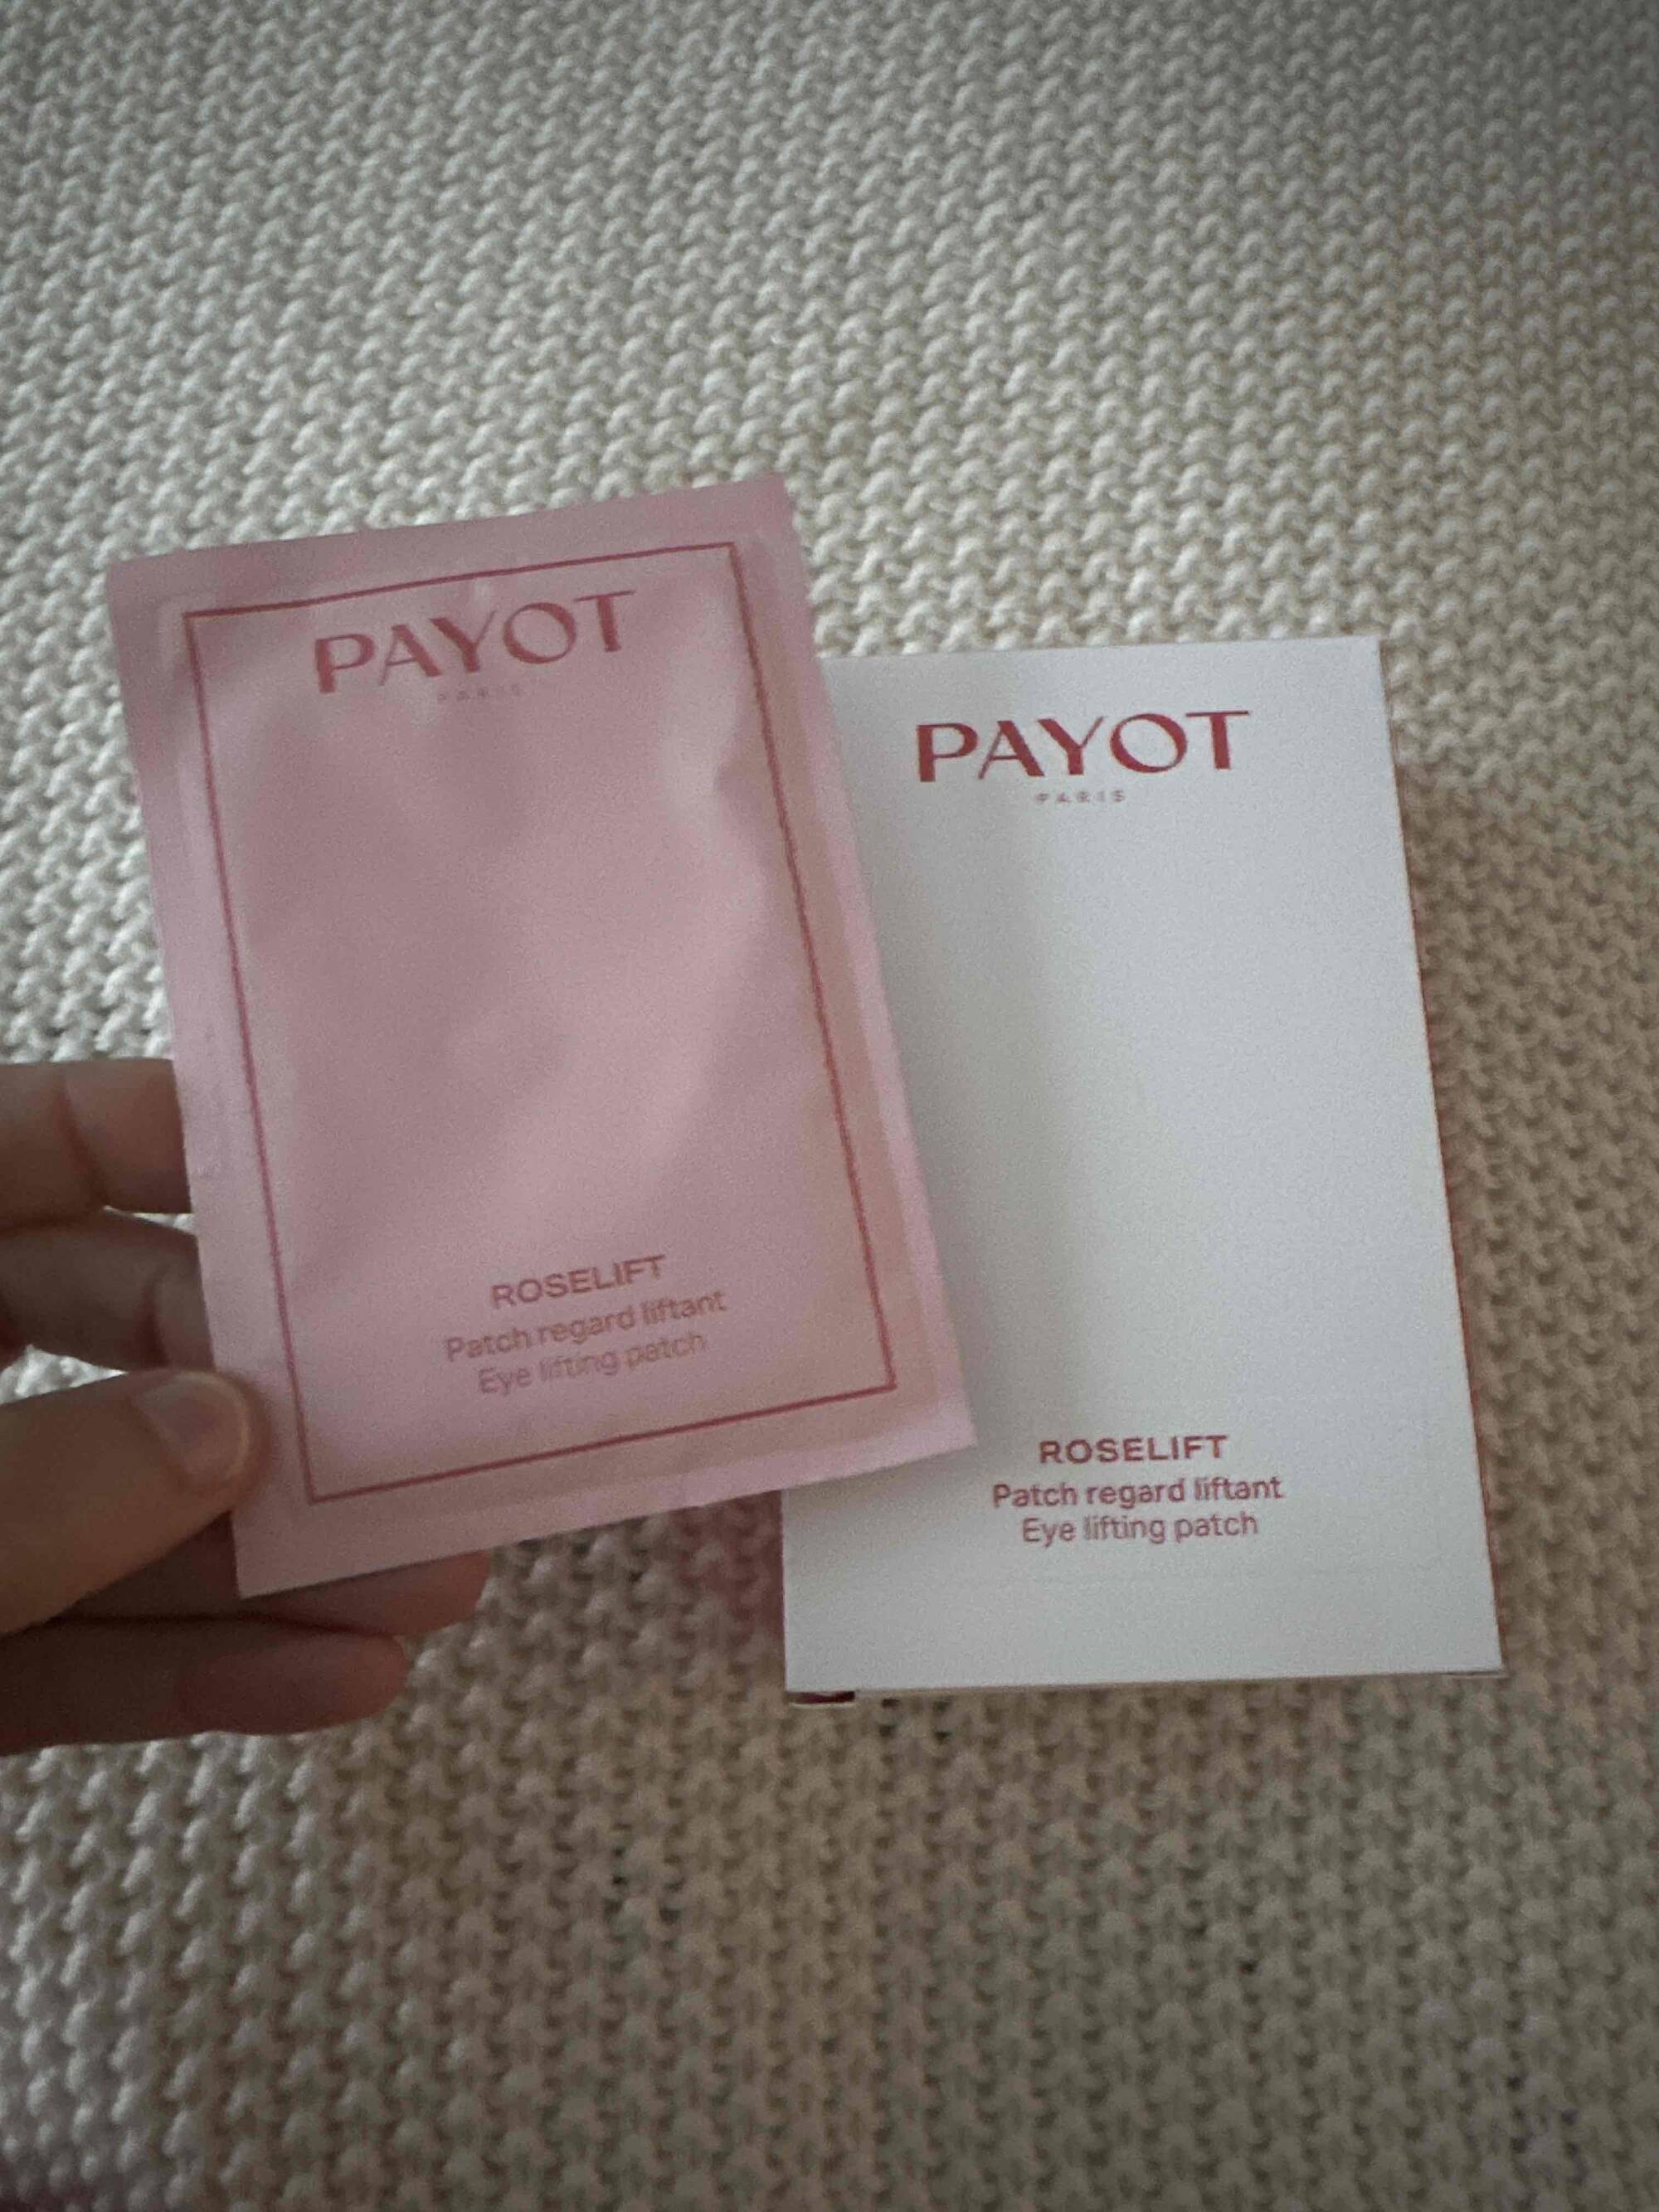 PAYOT - Roselift - Patch regard liftant